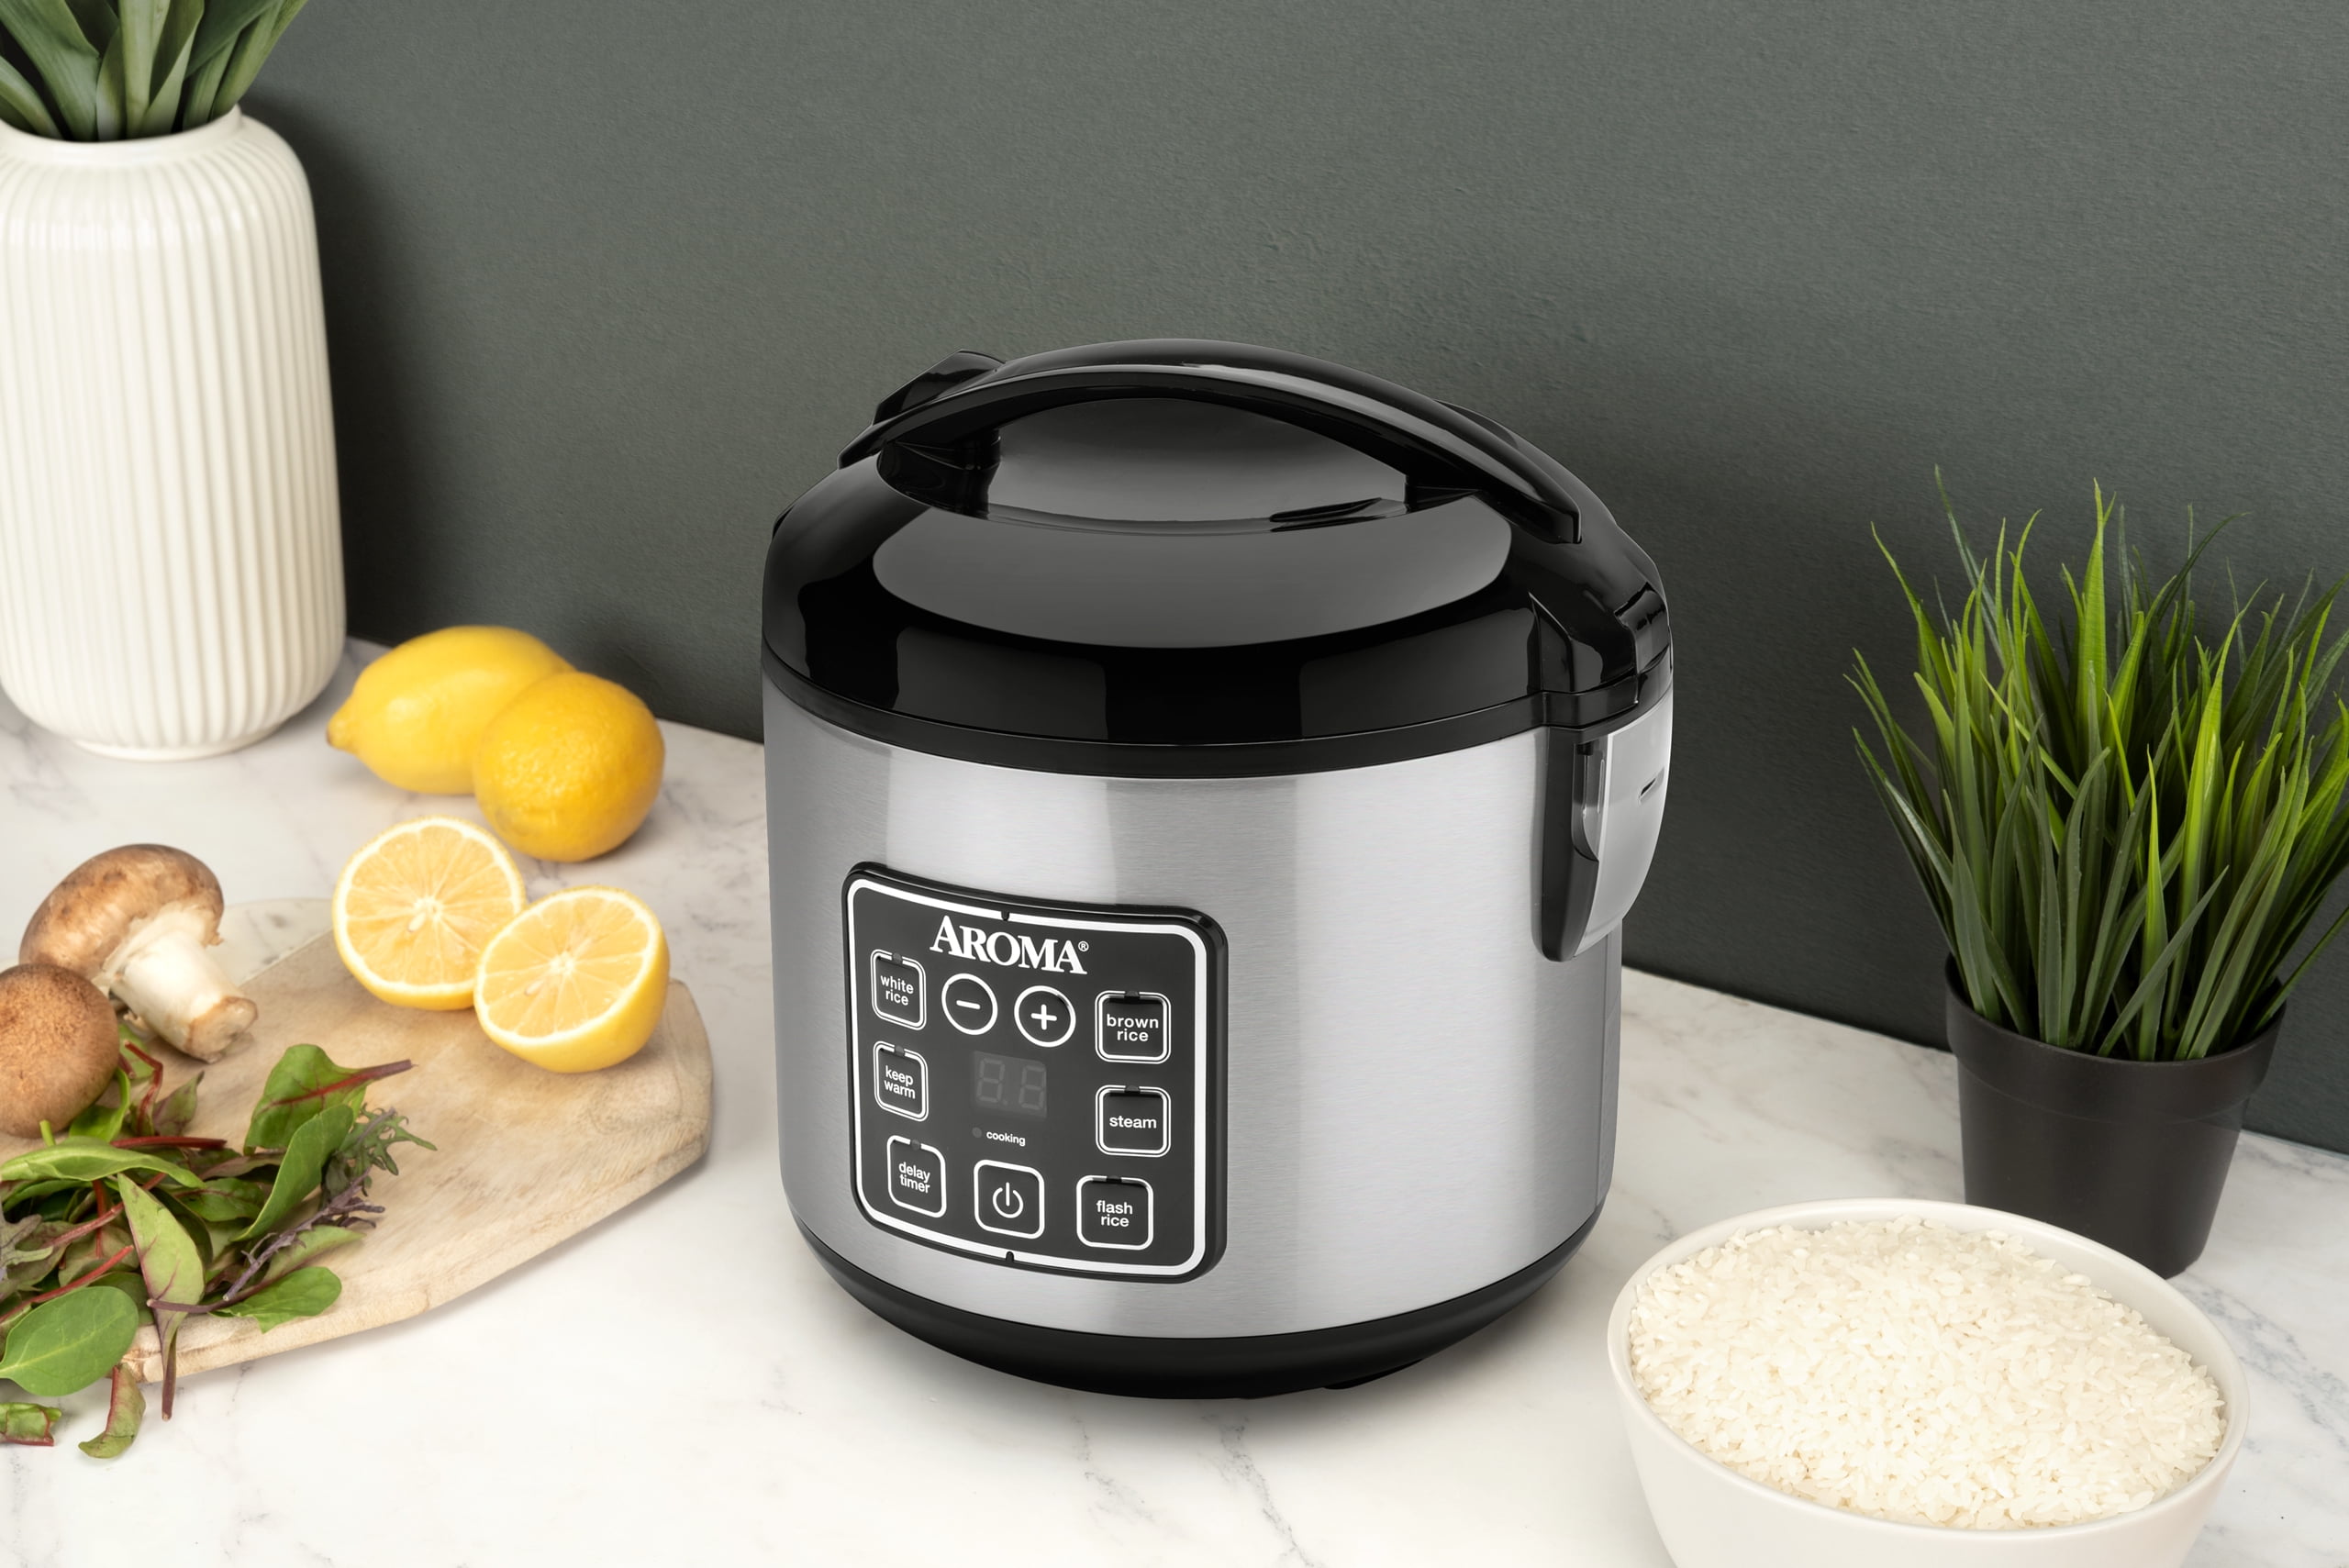 Aroma 8 Cup Rice Cooker Review Demo 